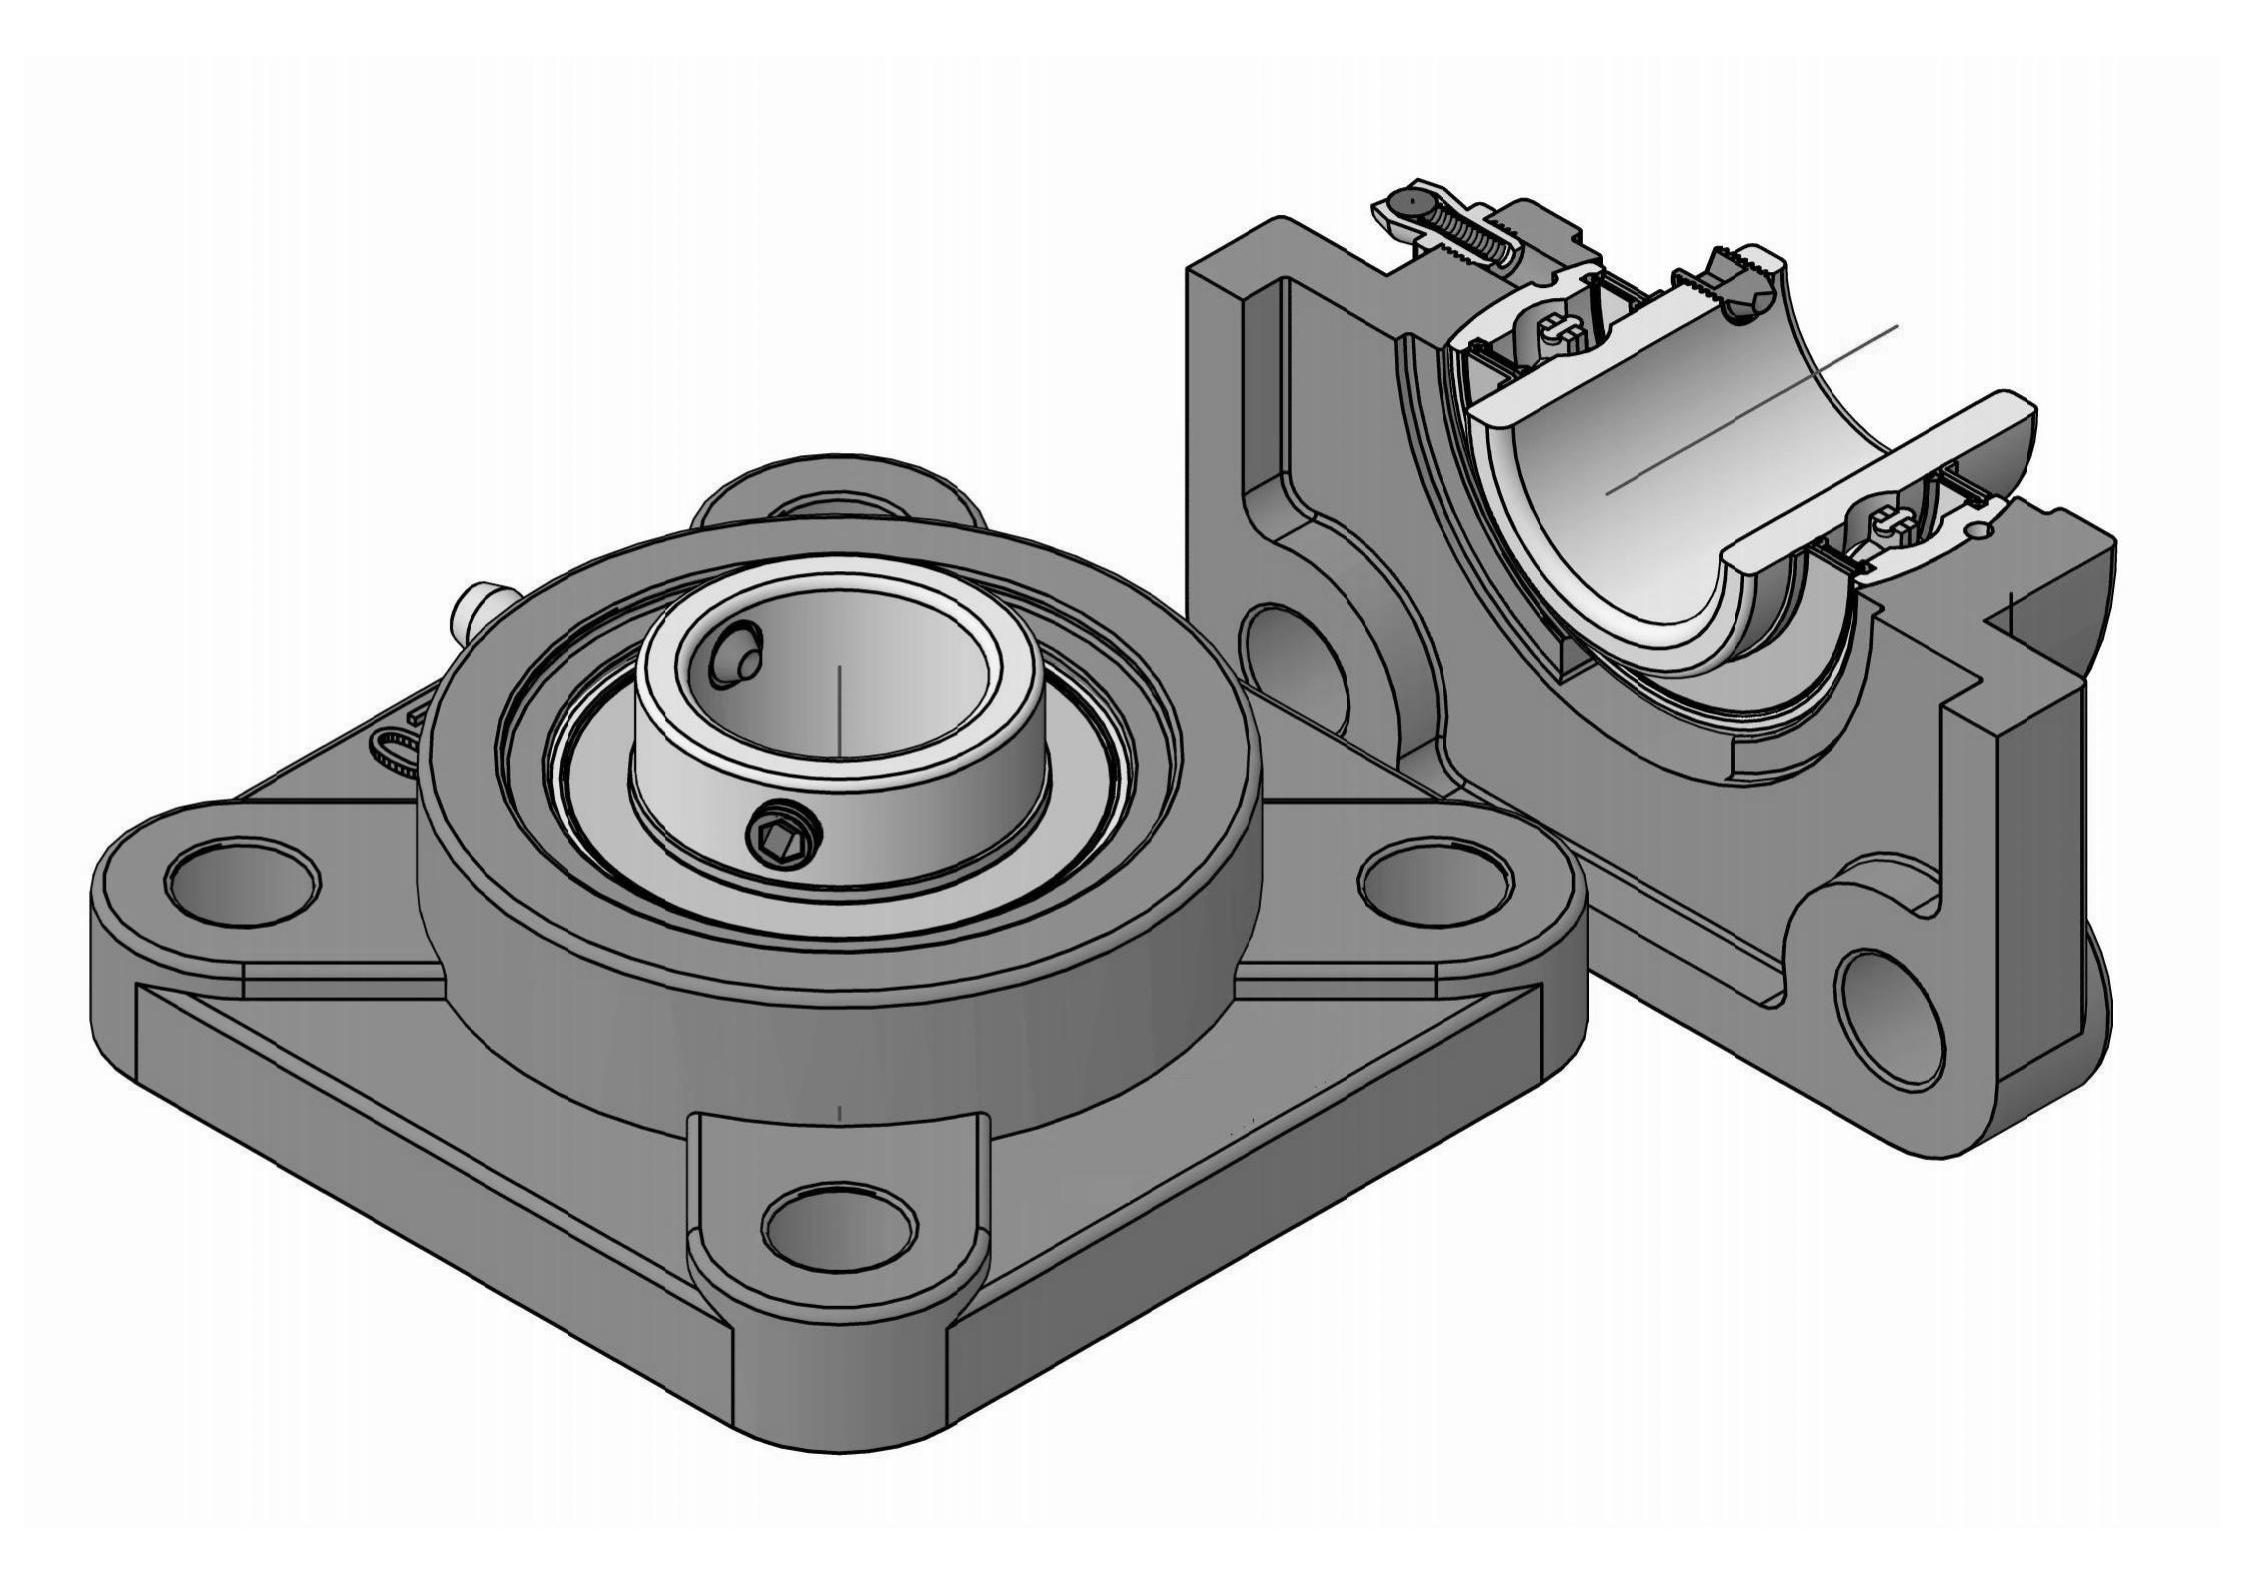 UCFX09-27 four Bolt Square flange bearing units with 1-11/16 inch bore